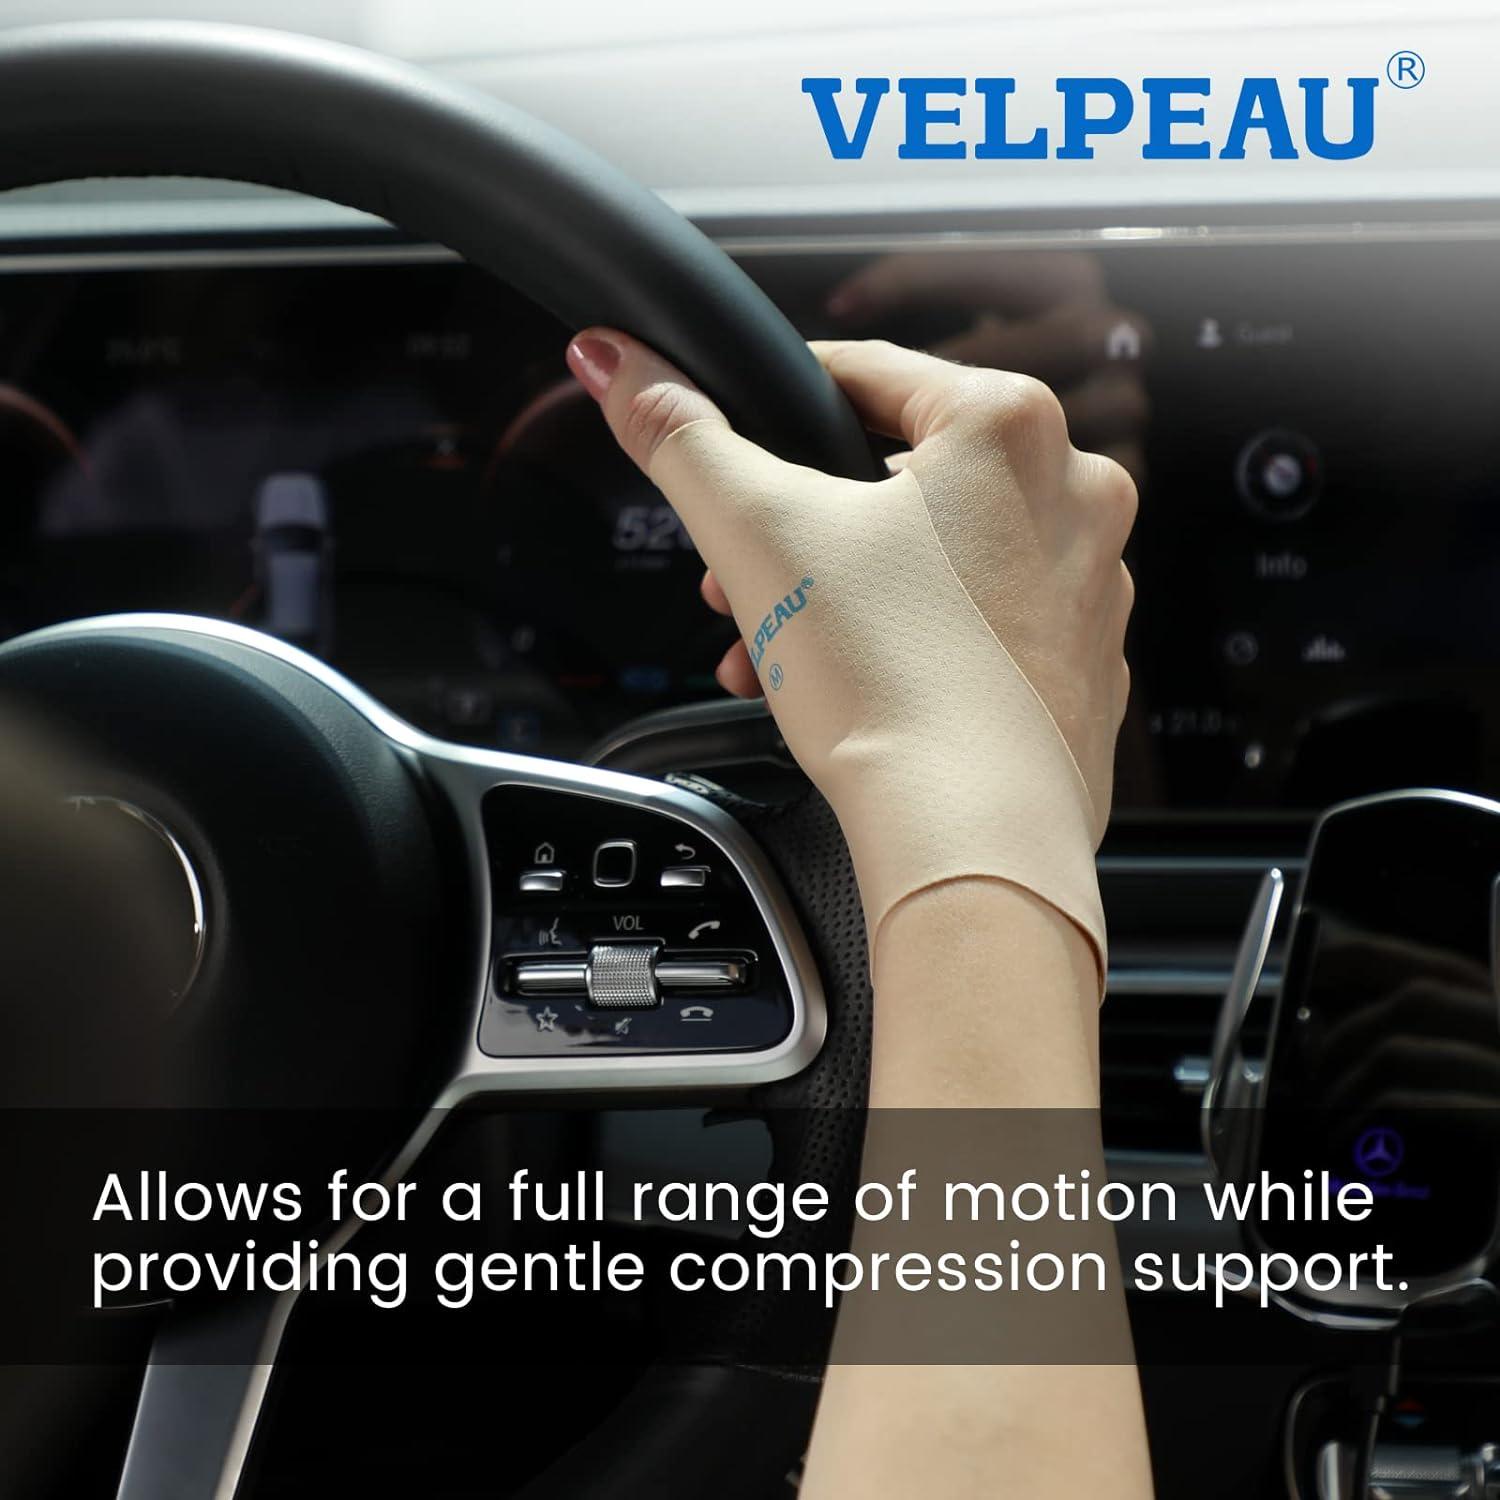 Velpeau Thumb Sleeve Relieves The Pain Of Mild Tenosynovitis And